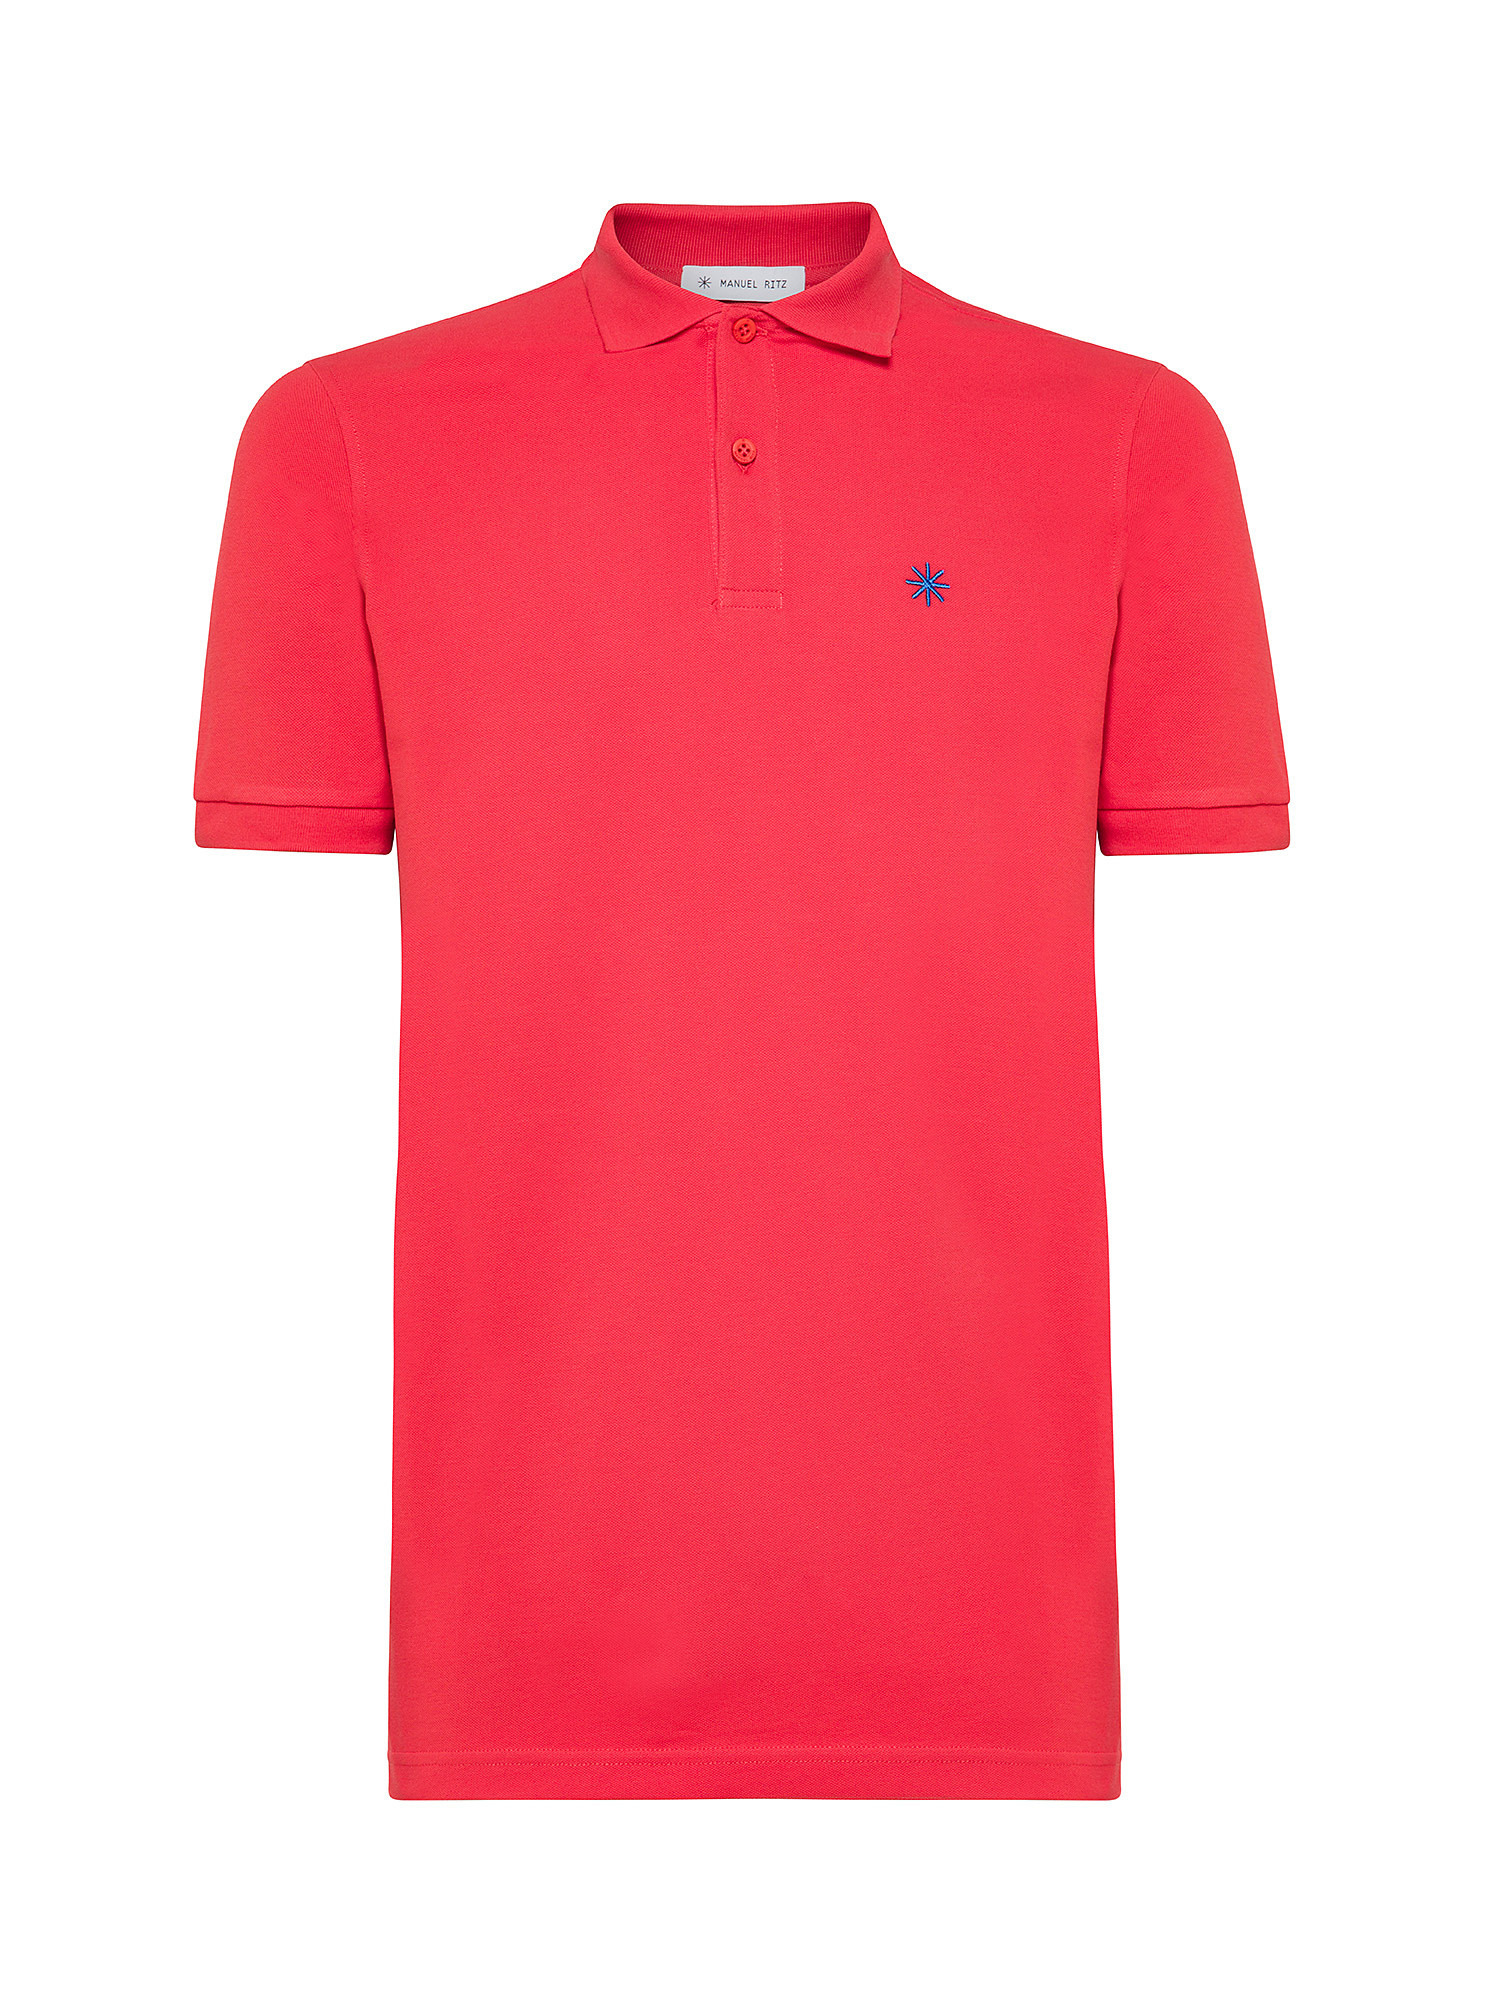 Manuel Ritz - Polo with contrasting embroidered logo, Red, large image number 0